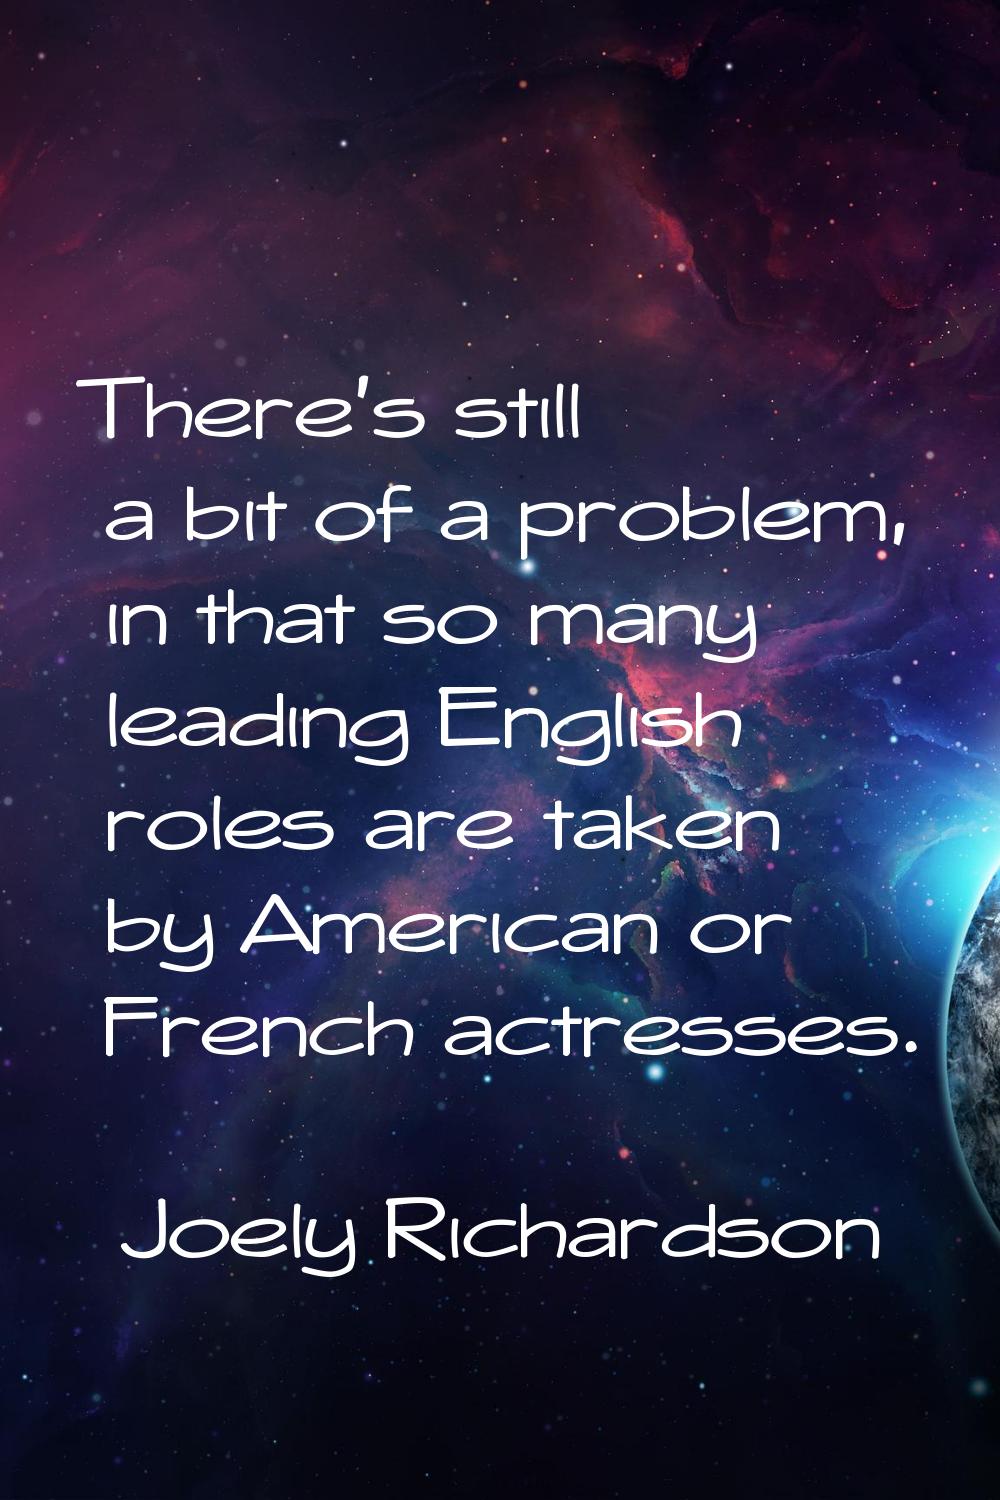 There's still a bit of a problem, in that so many leading English roles are taken by American or Fr